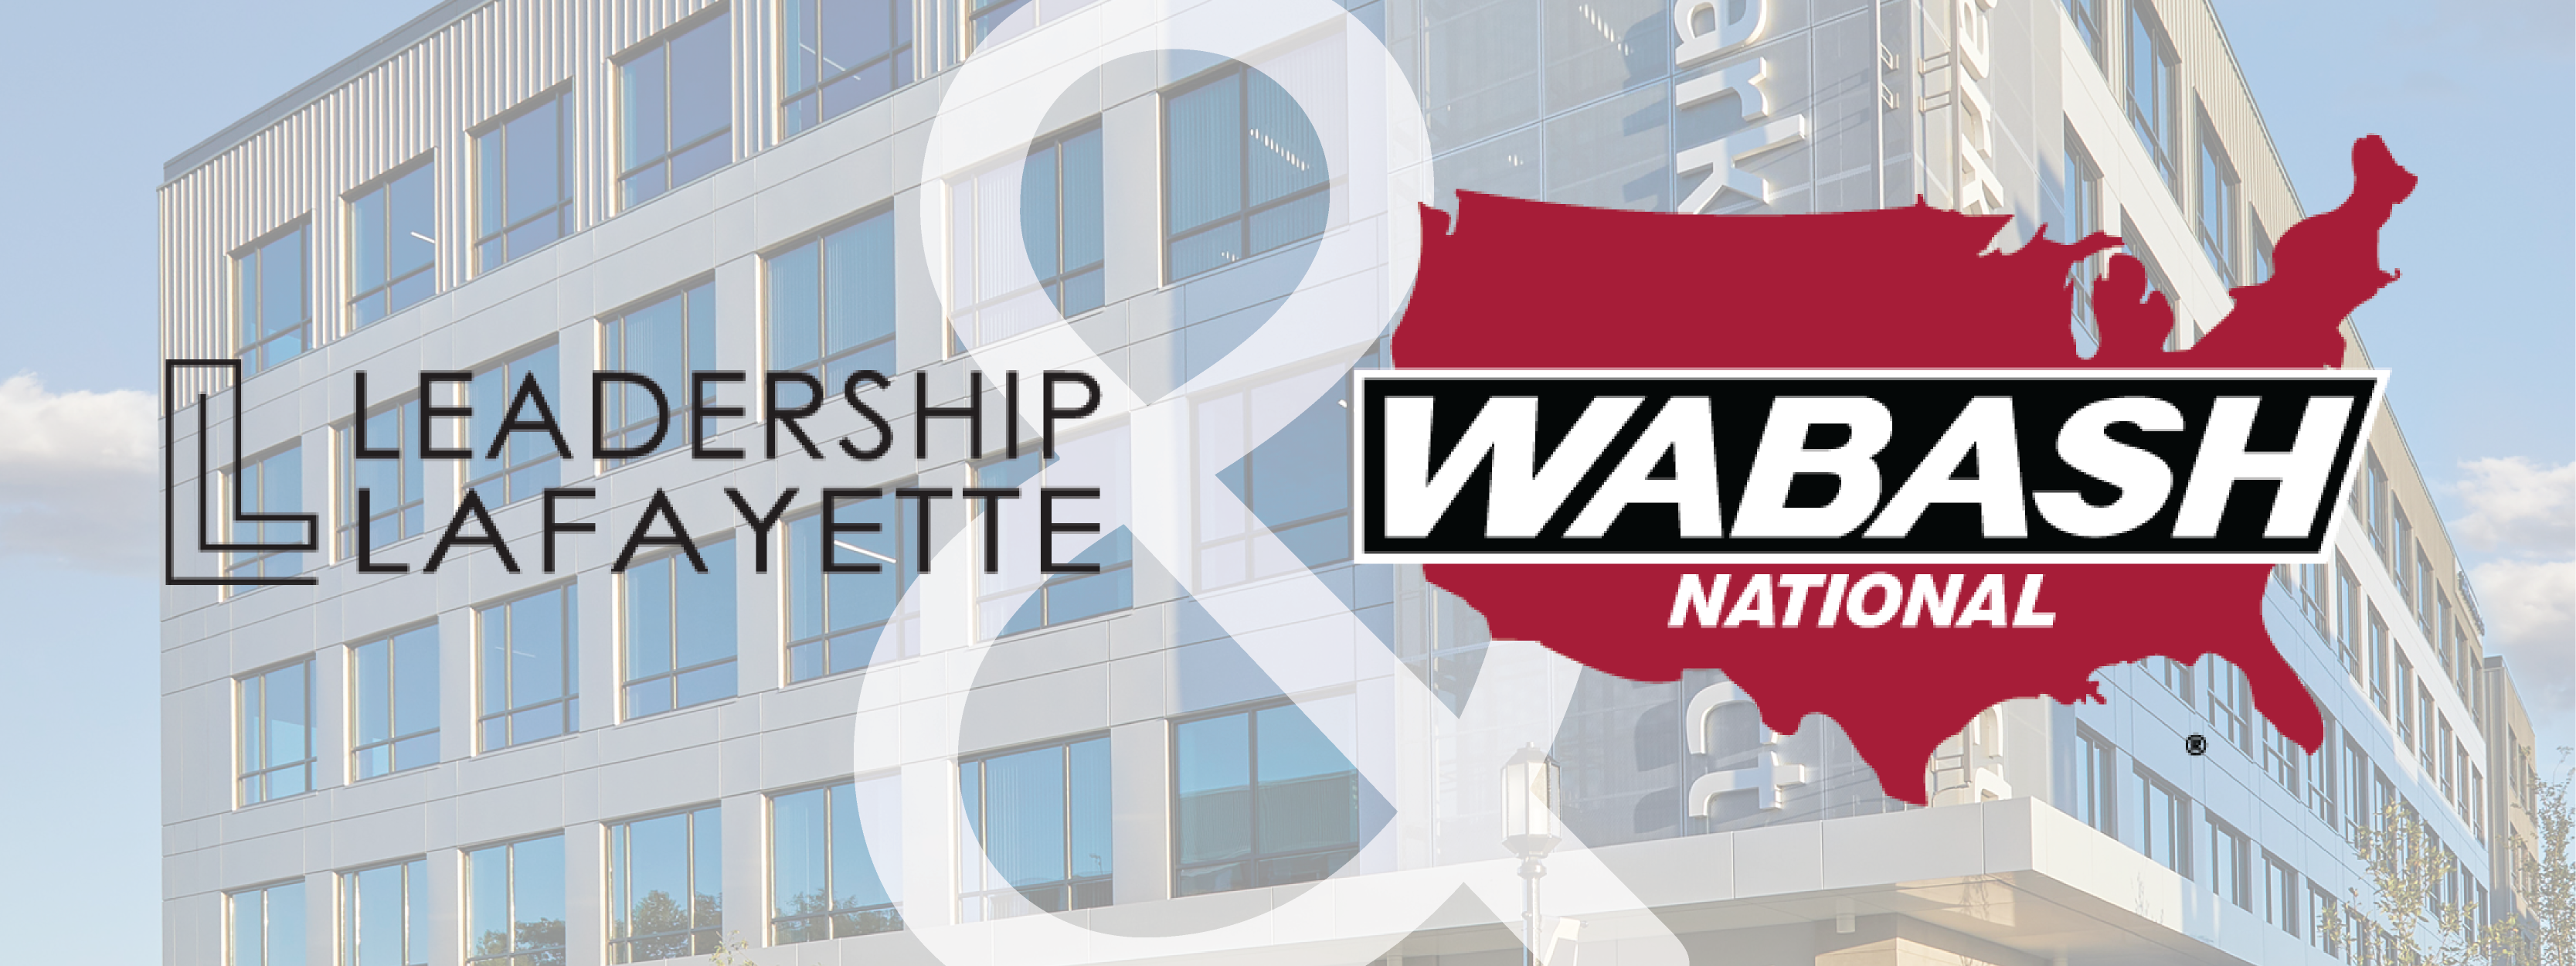 Leadership Lafayette and Wabash National logos on top of Convergence building photo